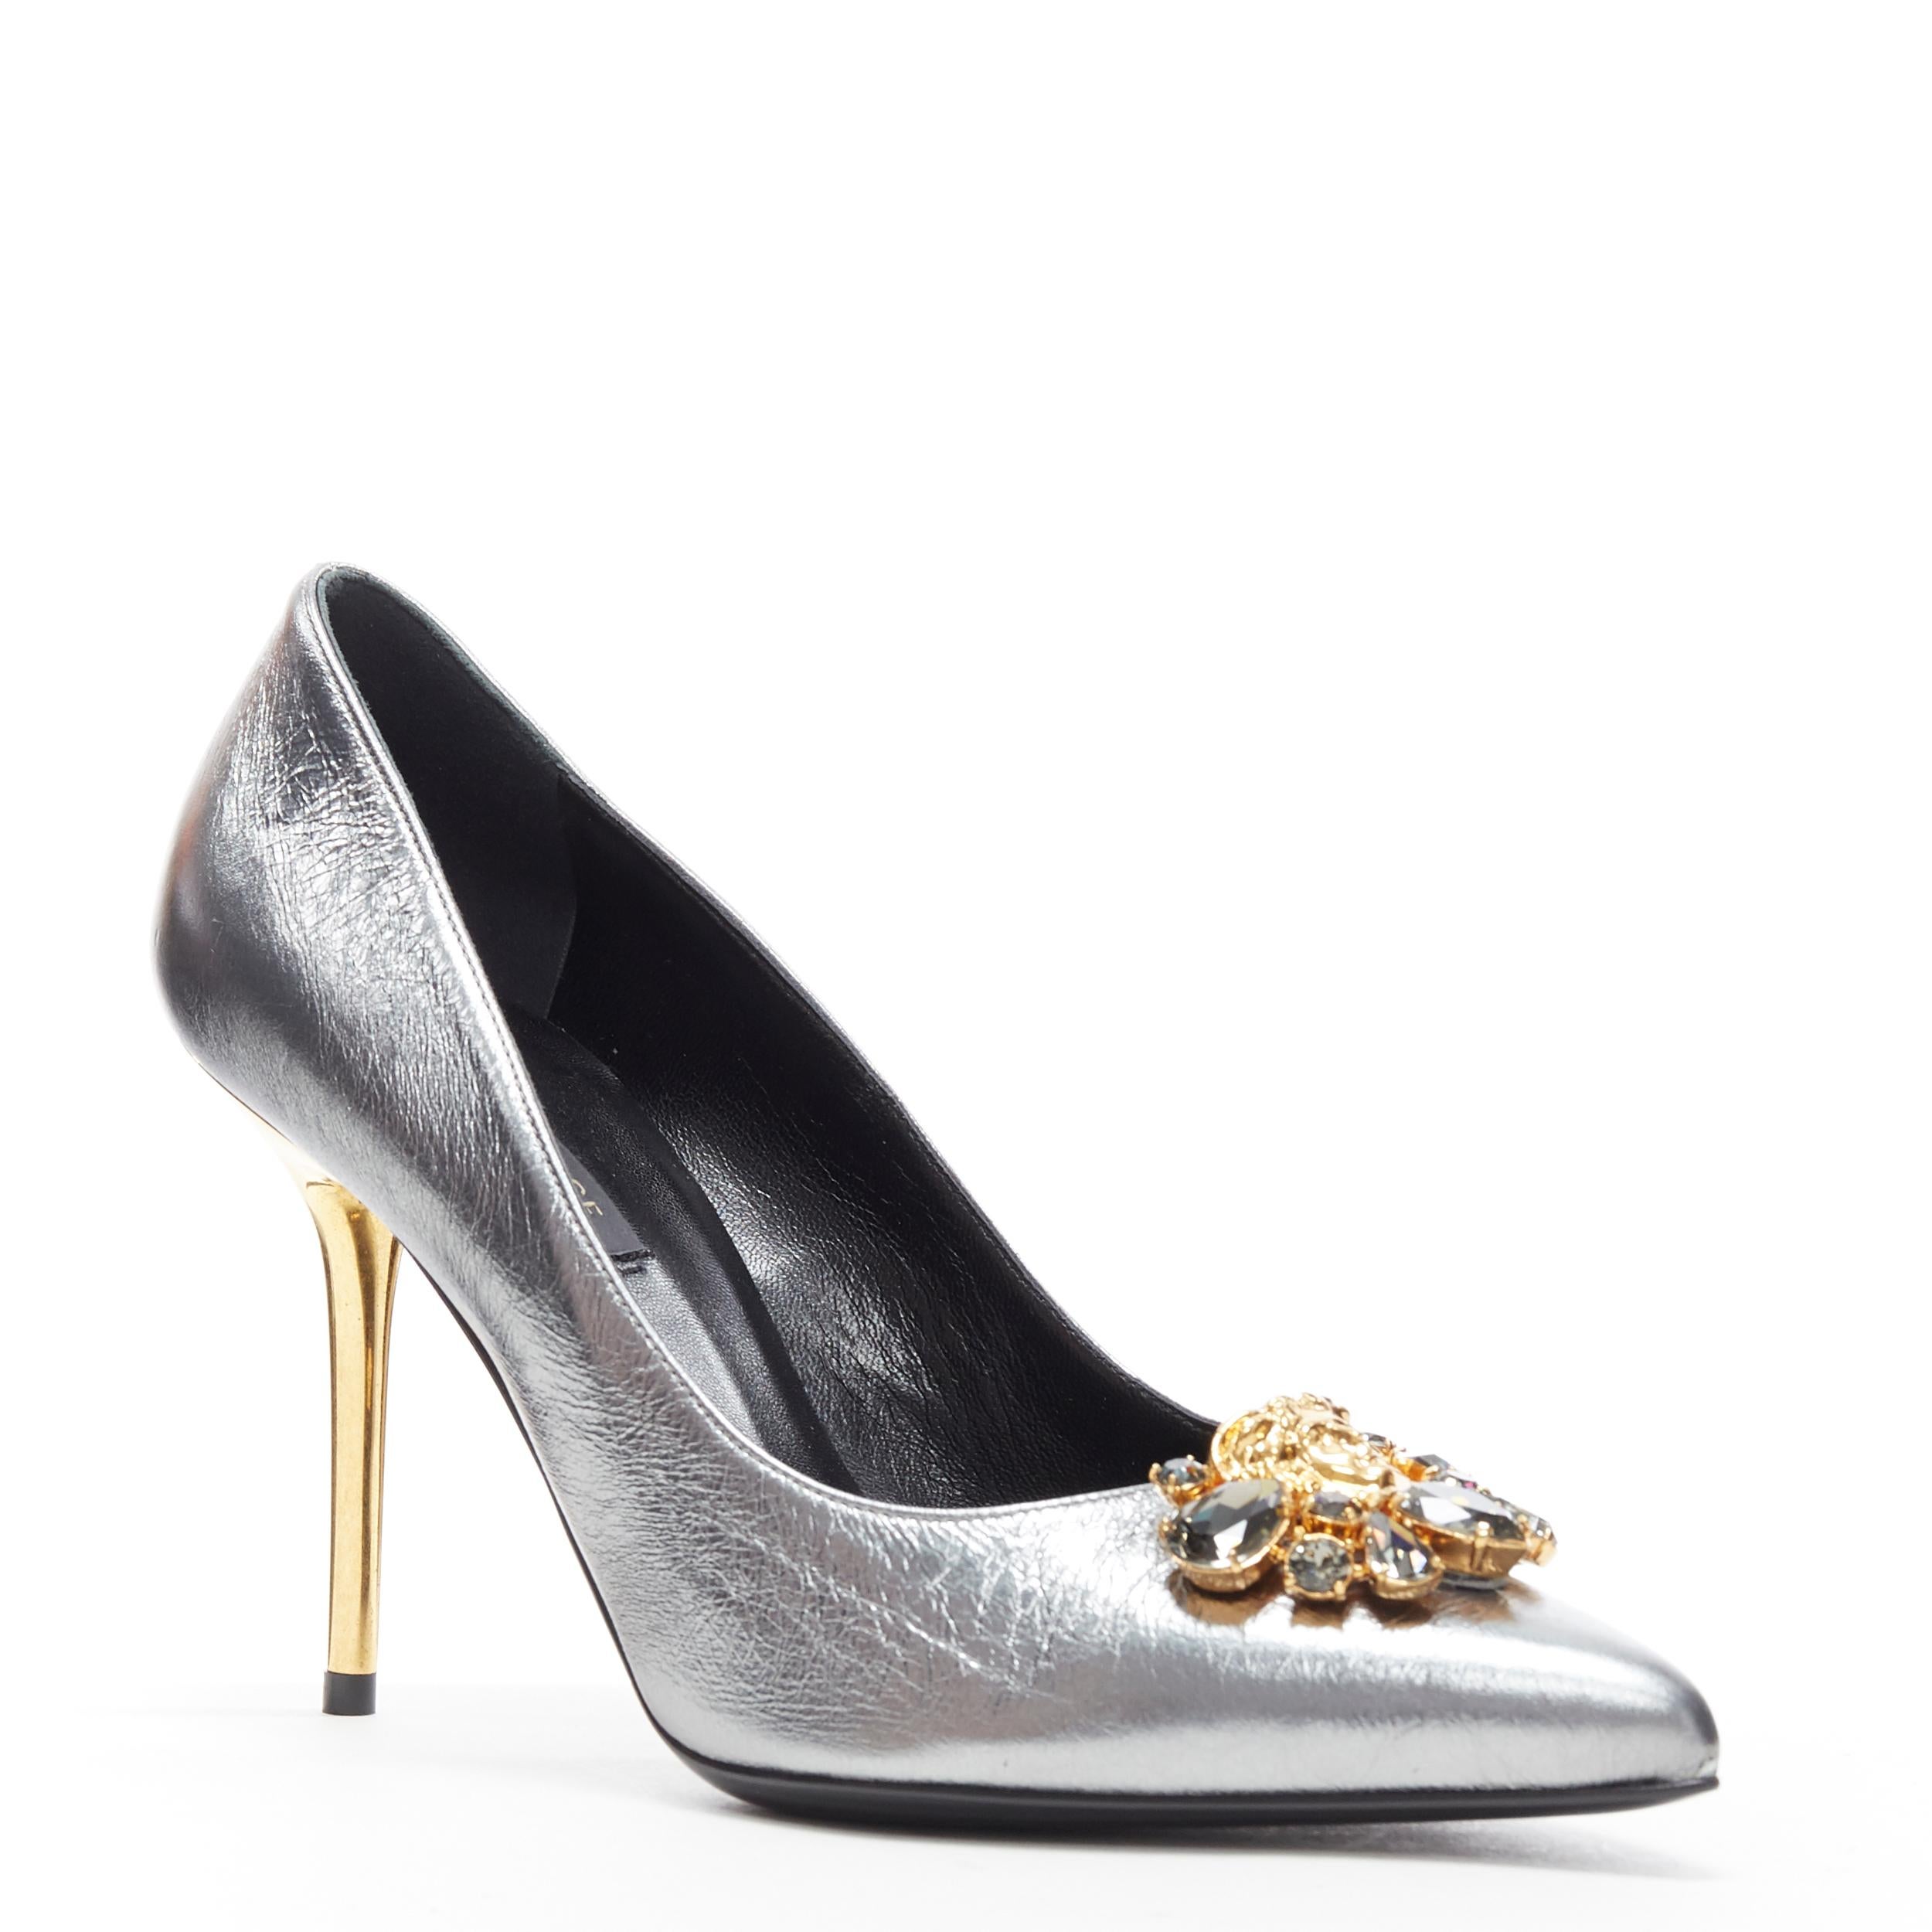 new VERSACE Palazzo Medusa crystal jewel embellished silver leather pump EU38
Brand: Versace
Designer: Donatella Versace
Model Name / Style: Palazzo Medusa strass pump
Material: Leather; kangaroo leather
Color: Silver
Pattern: Solid
Closure: Slip